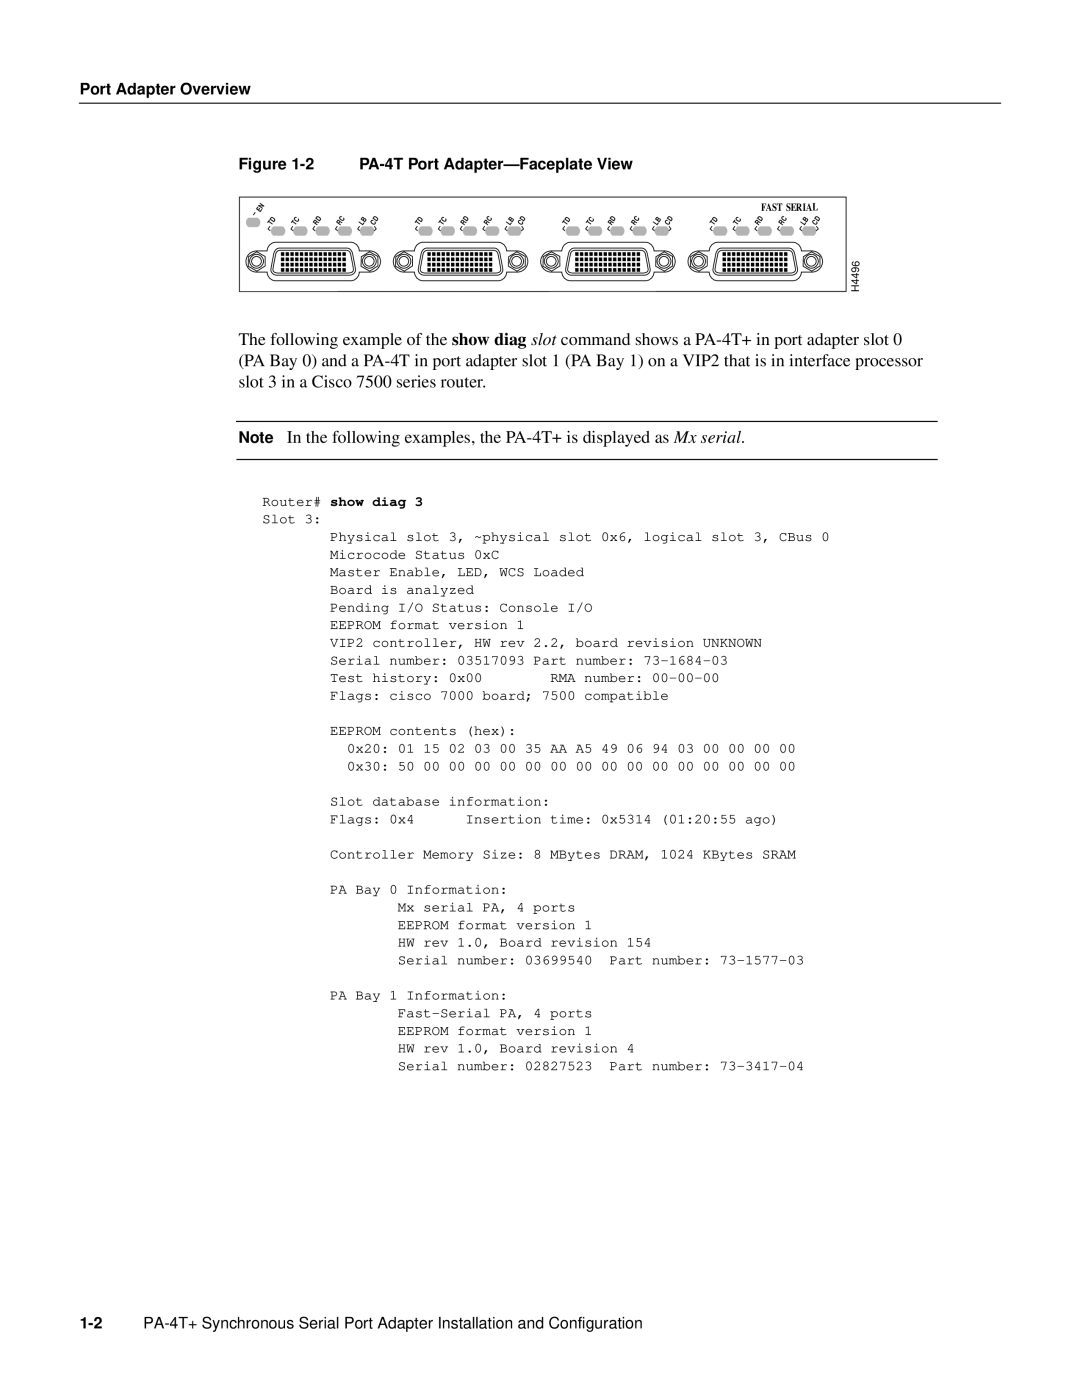 Cisco Systems manual Note In the following examples, the PA-4T+ is displayed as Mx serial, Port Adapter Overview 